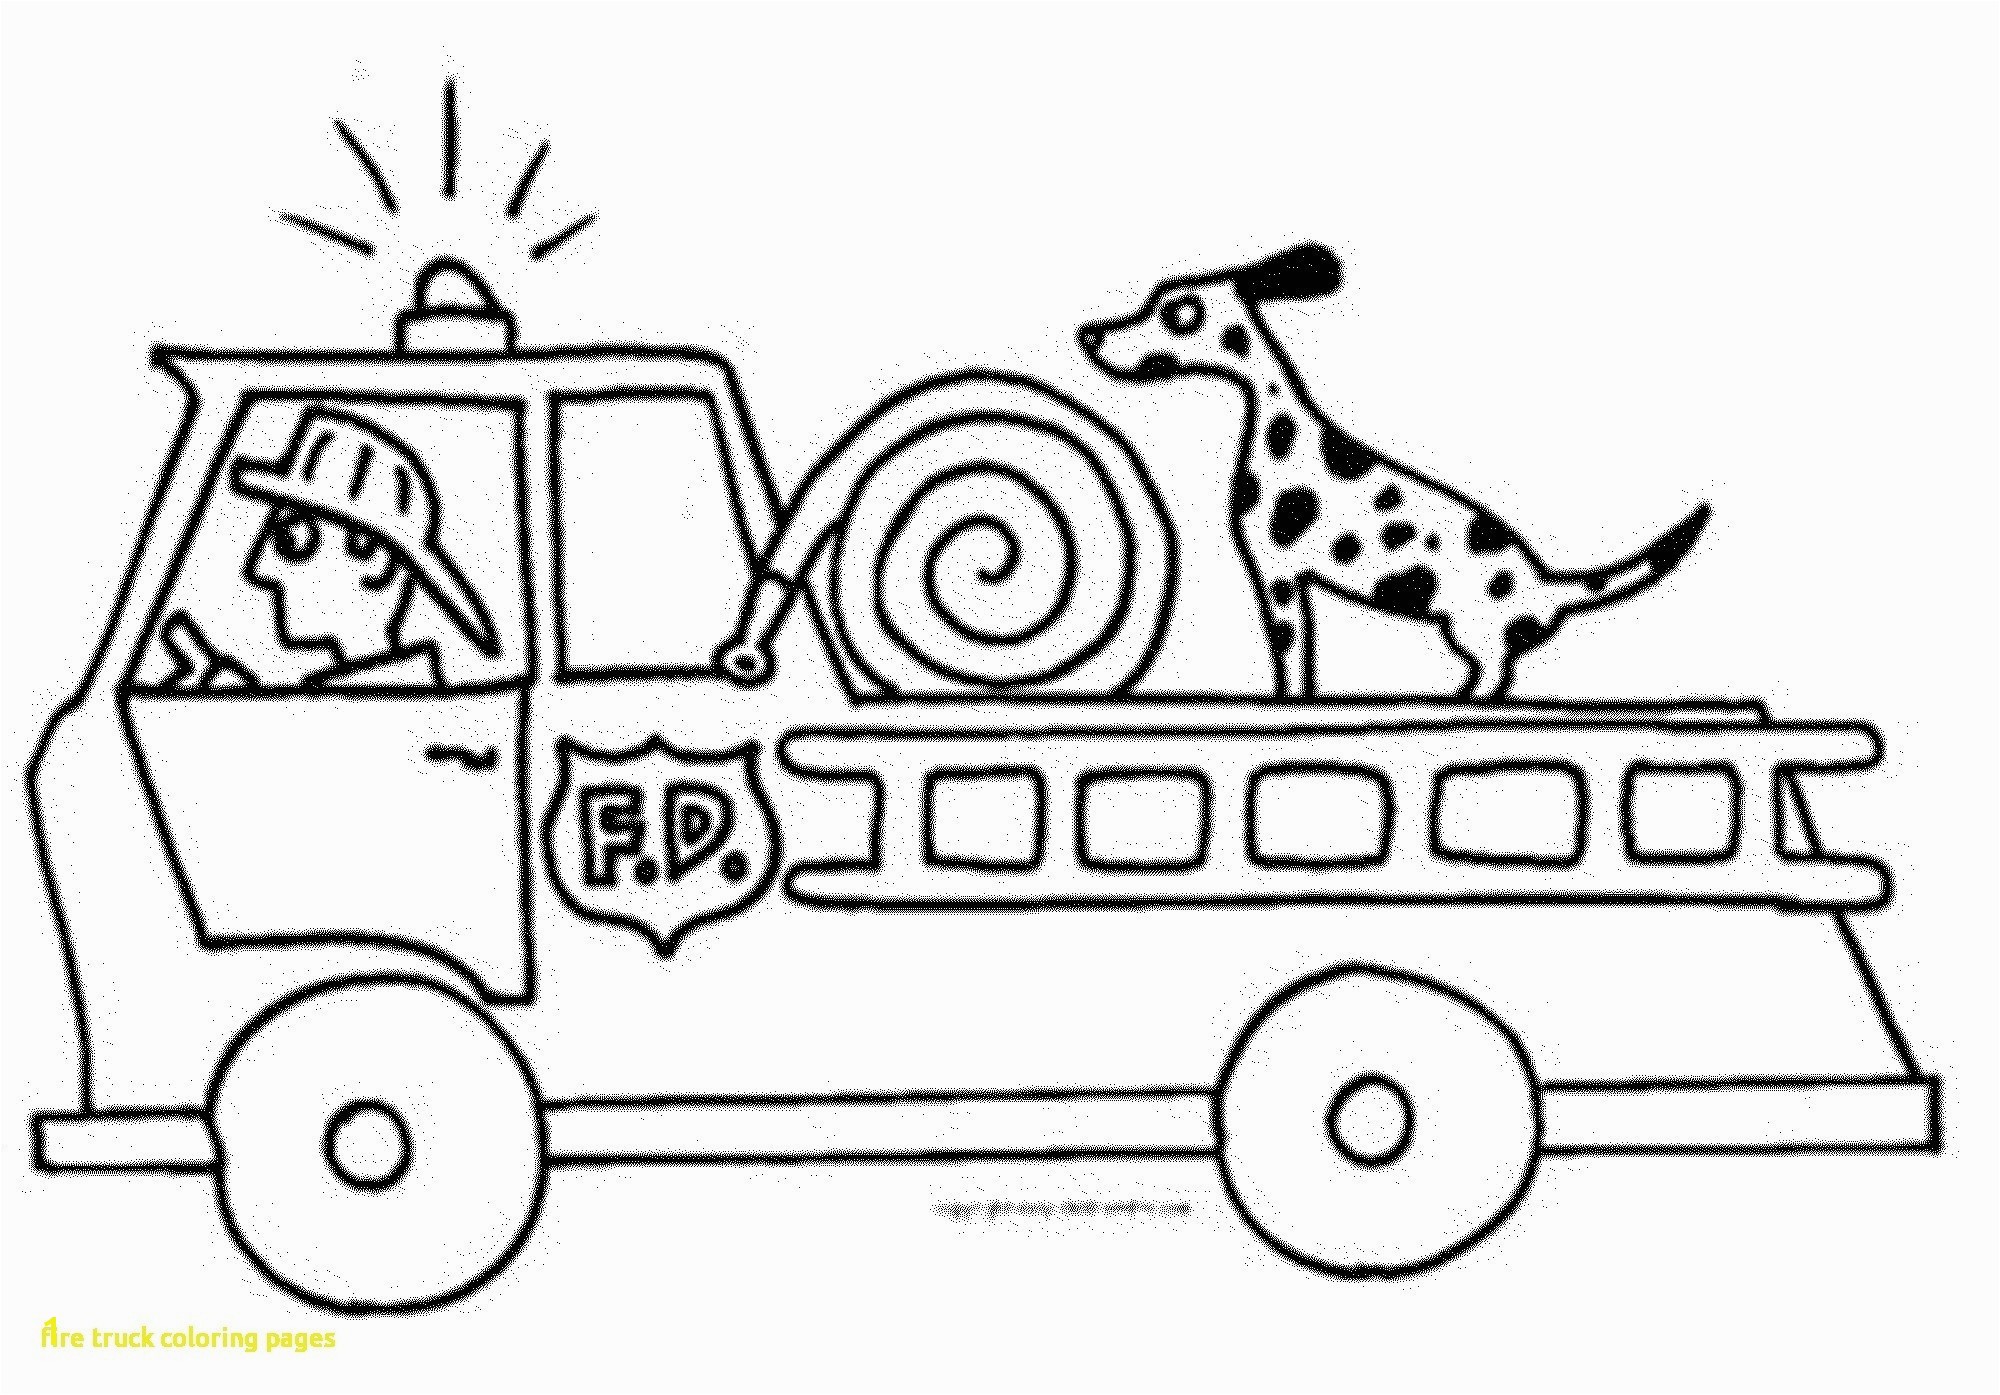 Simple Fire Truck Coloring Page Fire Truck Coloring Pages Sample thephotosync